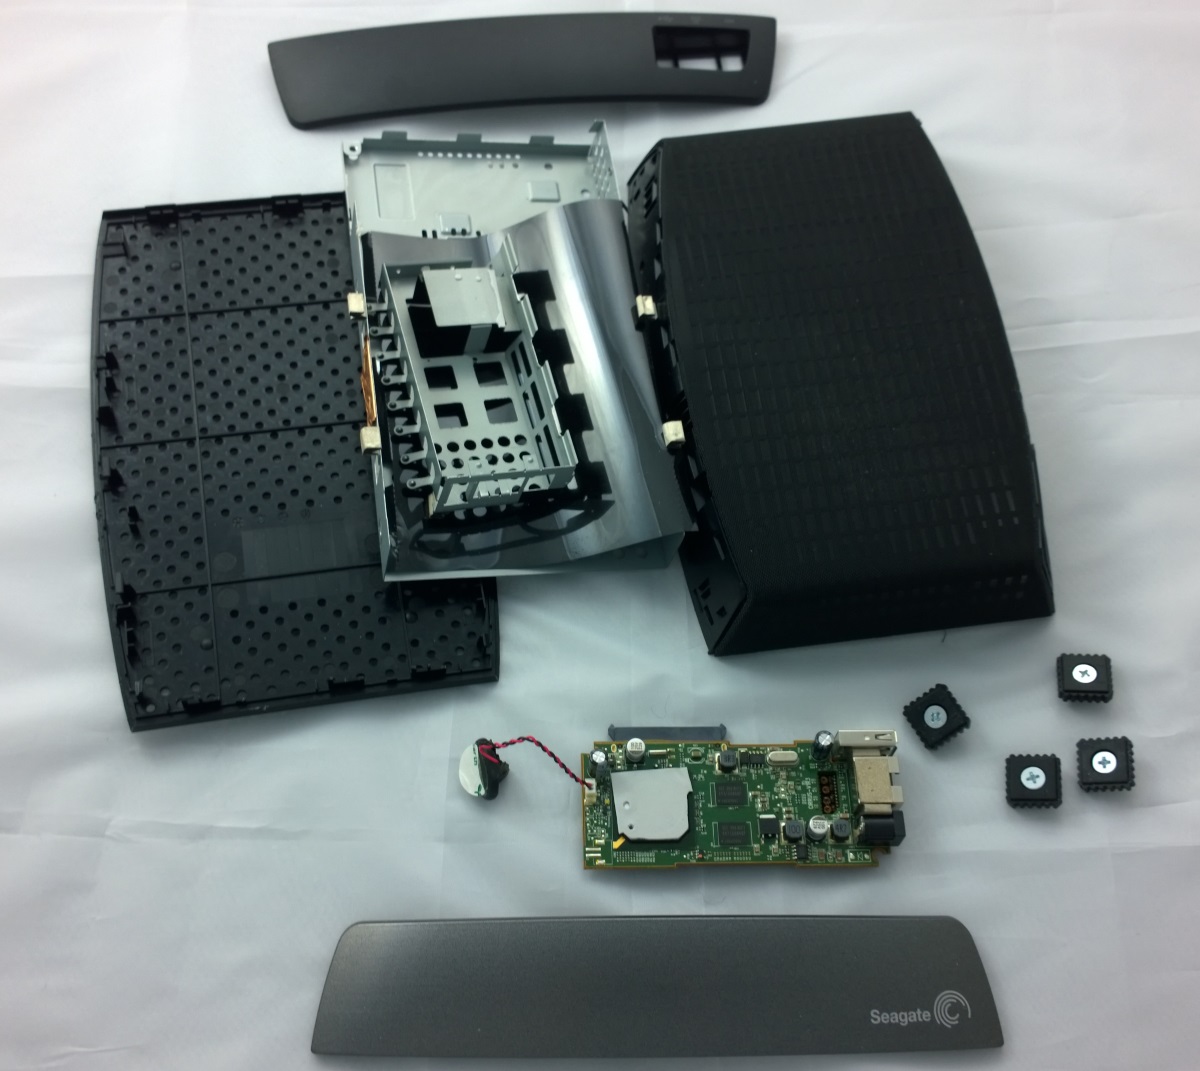 A Seagate Central enclosure disassembled